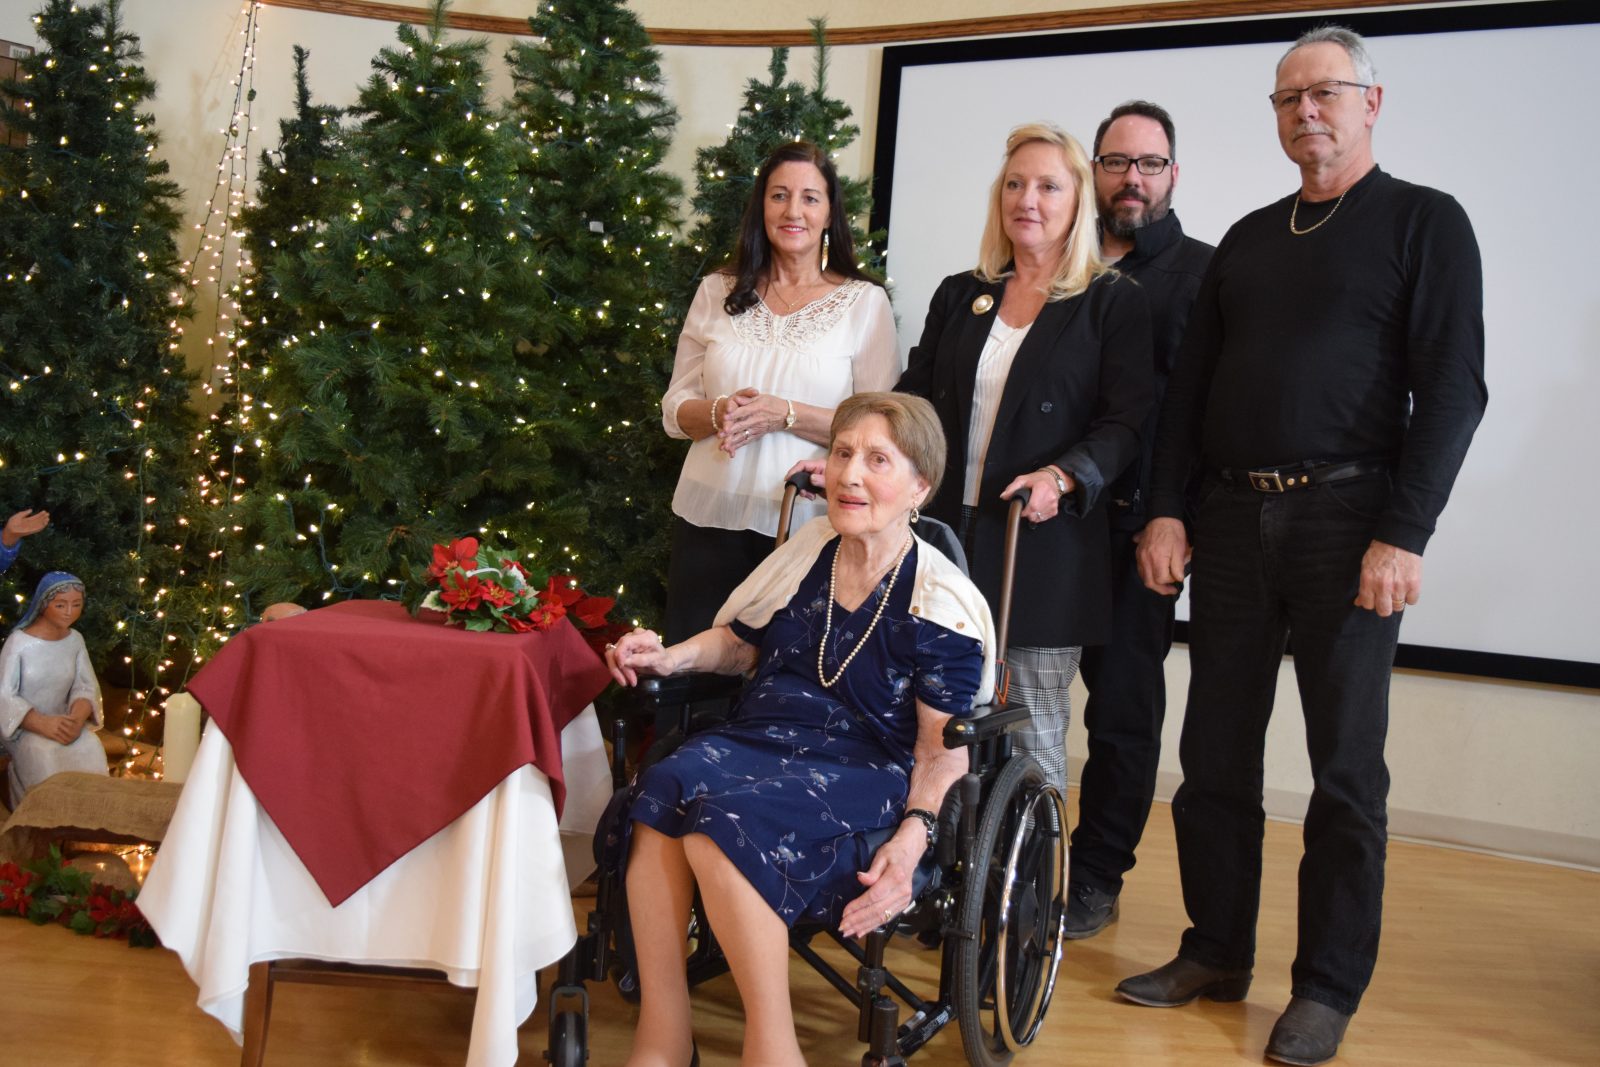 Lights of Hope support St. Joseph’s Continuing Care Centre